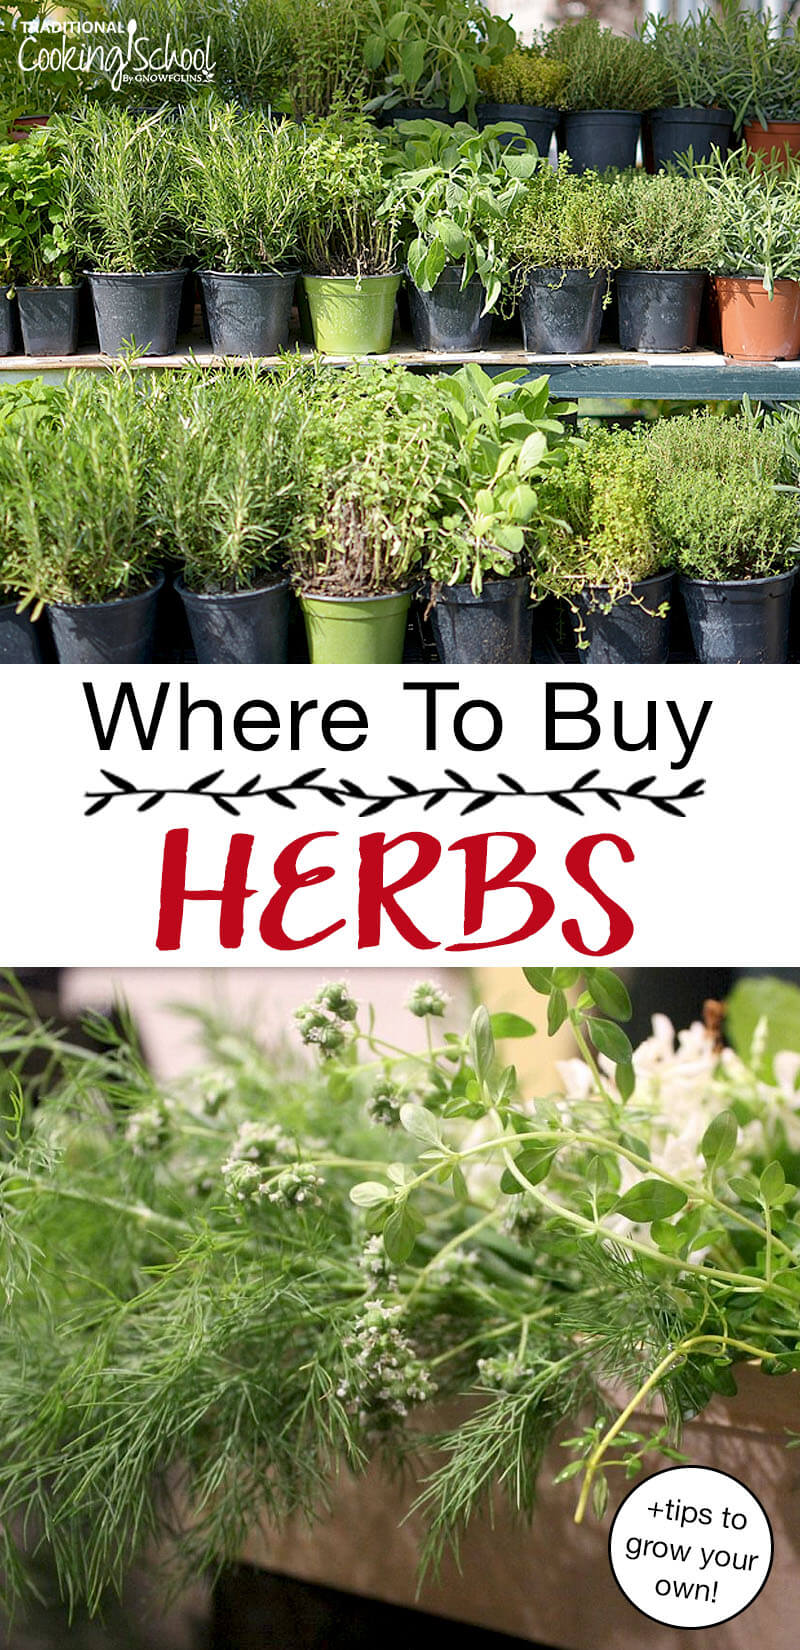 photo collage of fresh herbs with text overlay: "Where To Buy Herbs +tips for growing your own!"